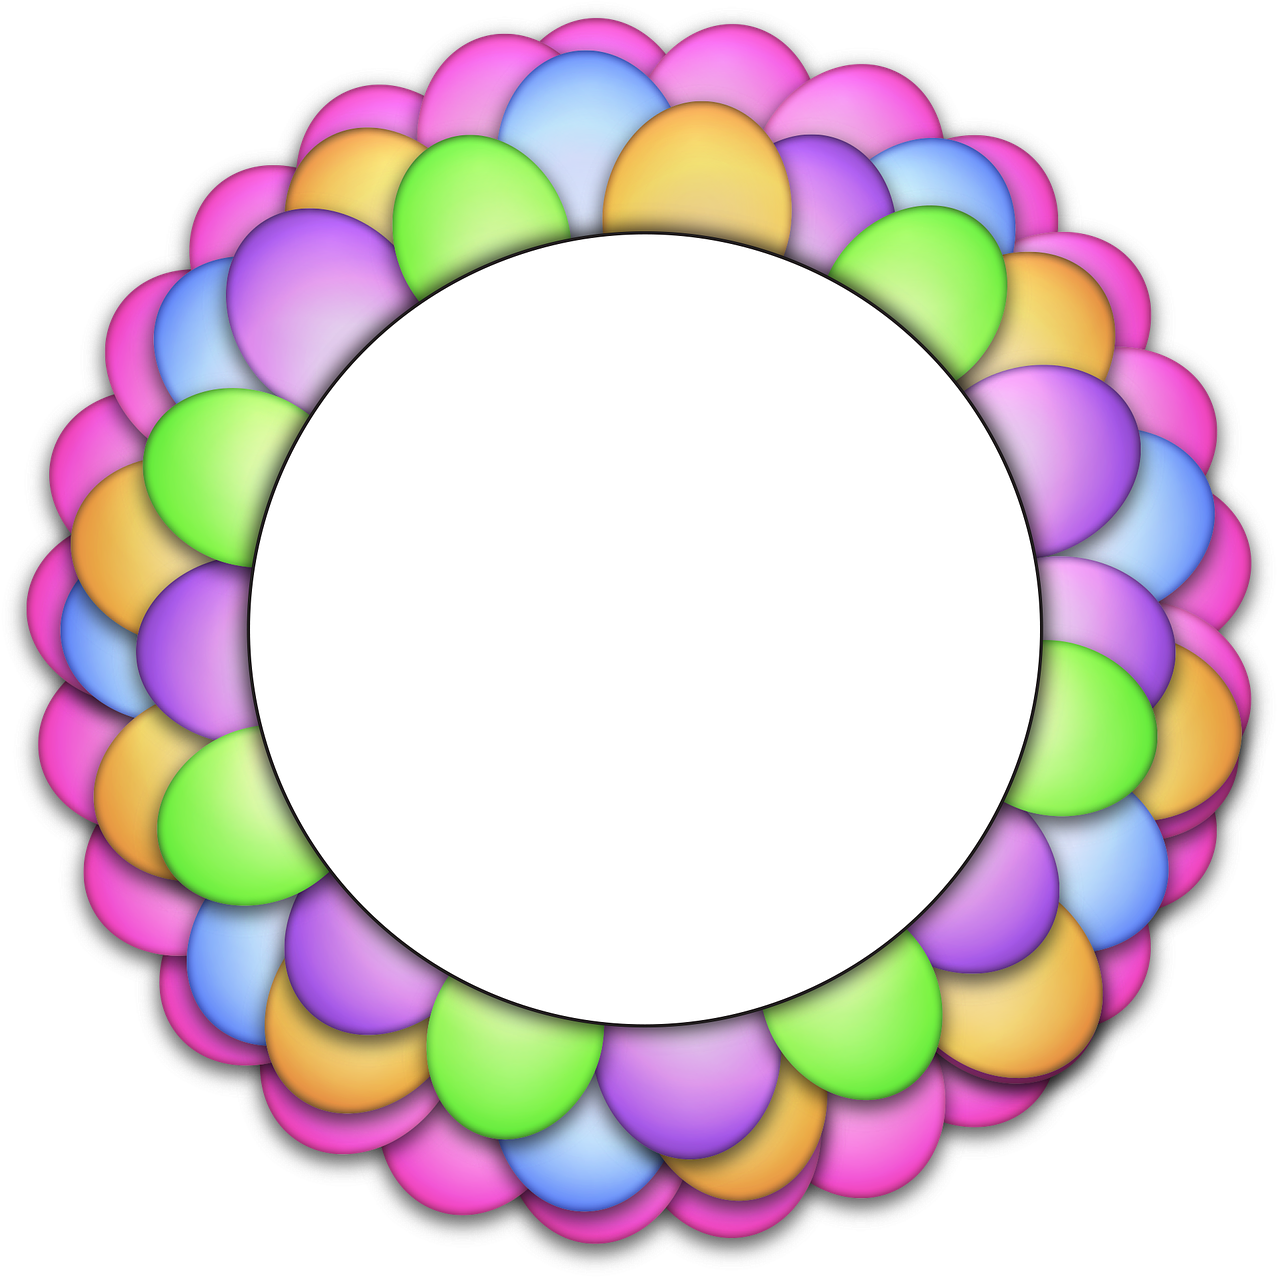 a circular shaped po with a white background